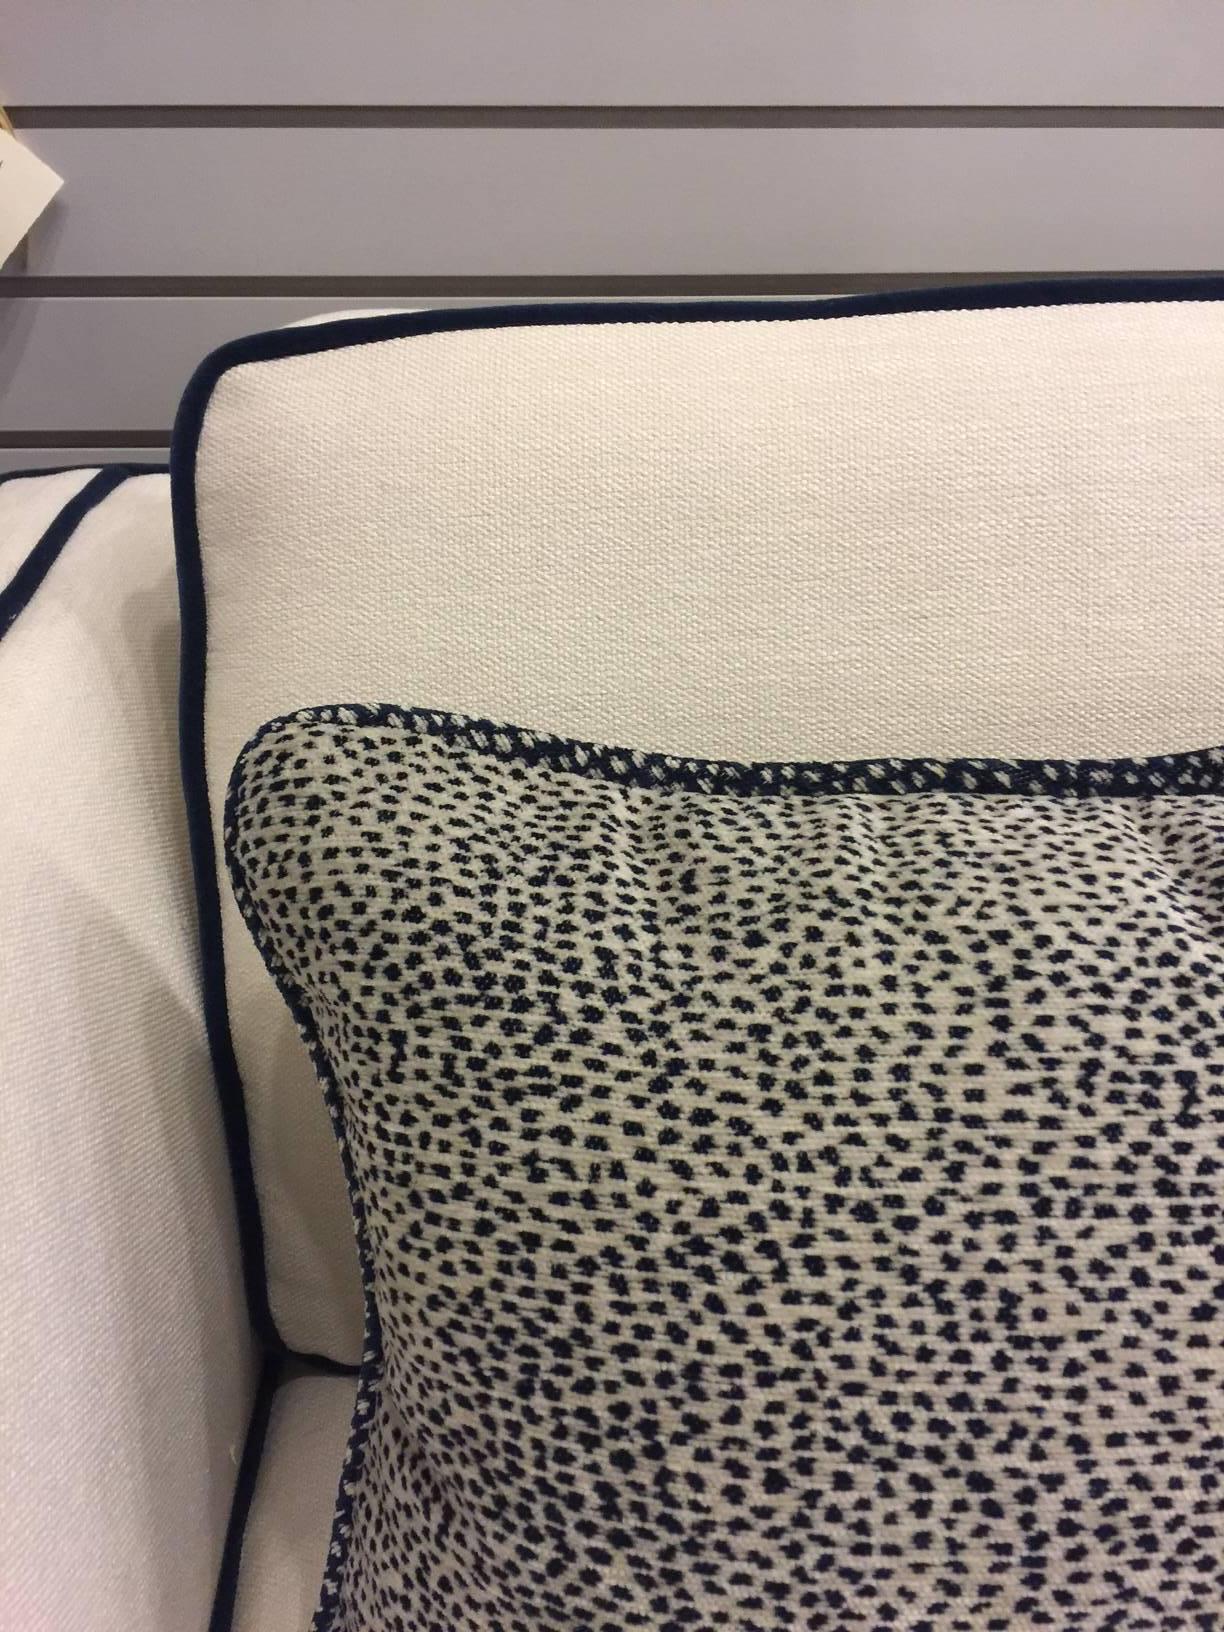 This vintage sofa has new cushions and new upholstery. The off-white upholstery has been accented with navy mohair cording. It is a crisp look, and sits quite comfortably. 

The blue and cream pillows shown in some photos have been sold.